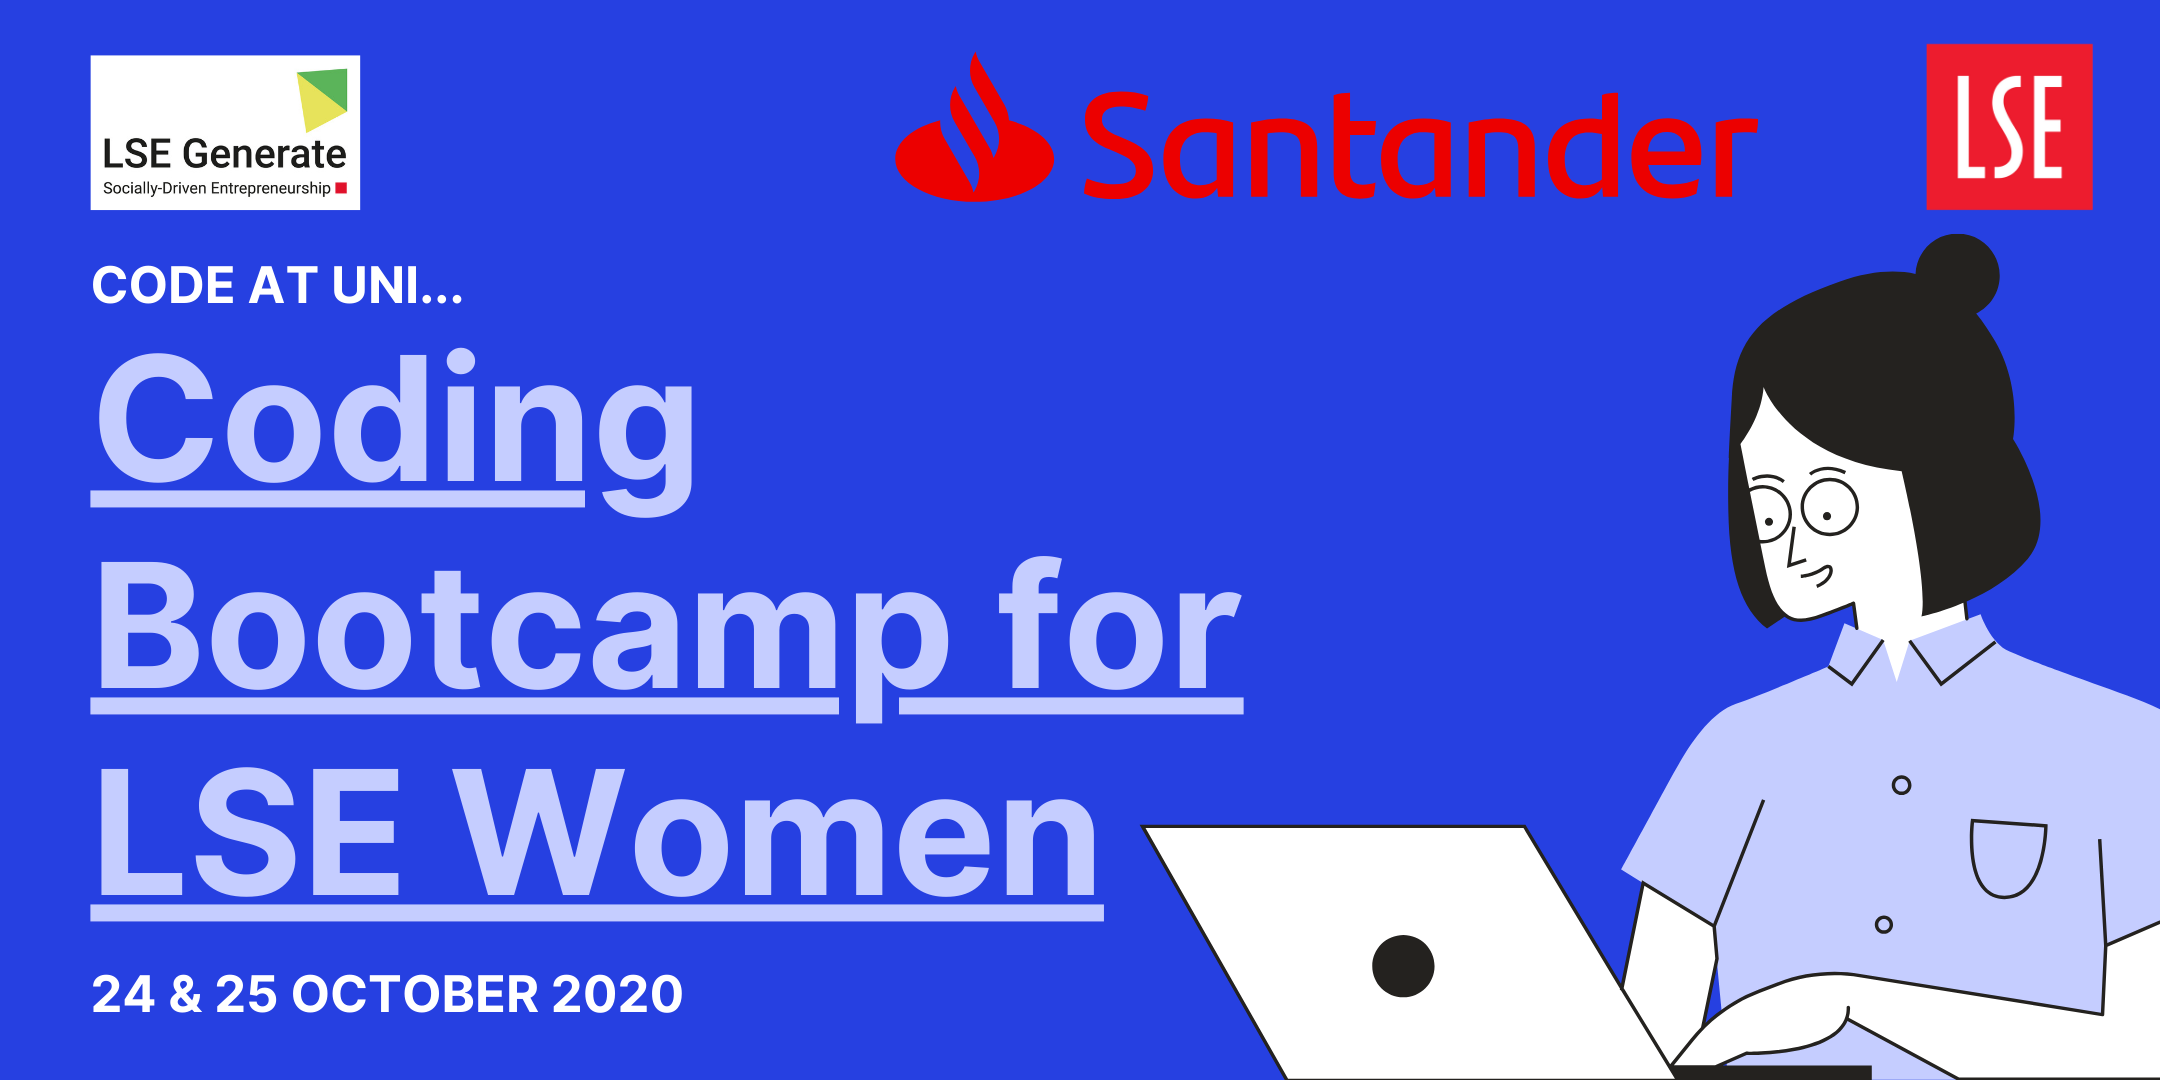 Coding Bootcamp for women on 24 and 25 October